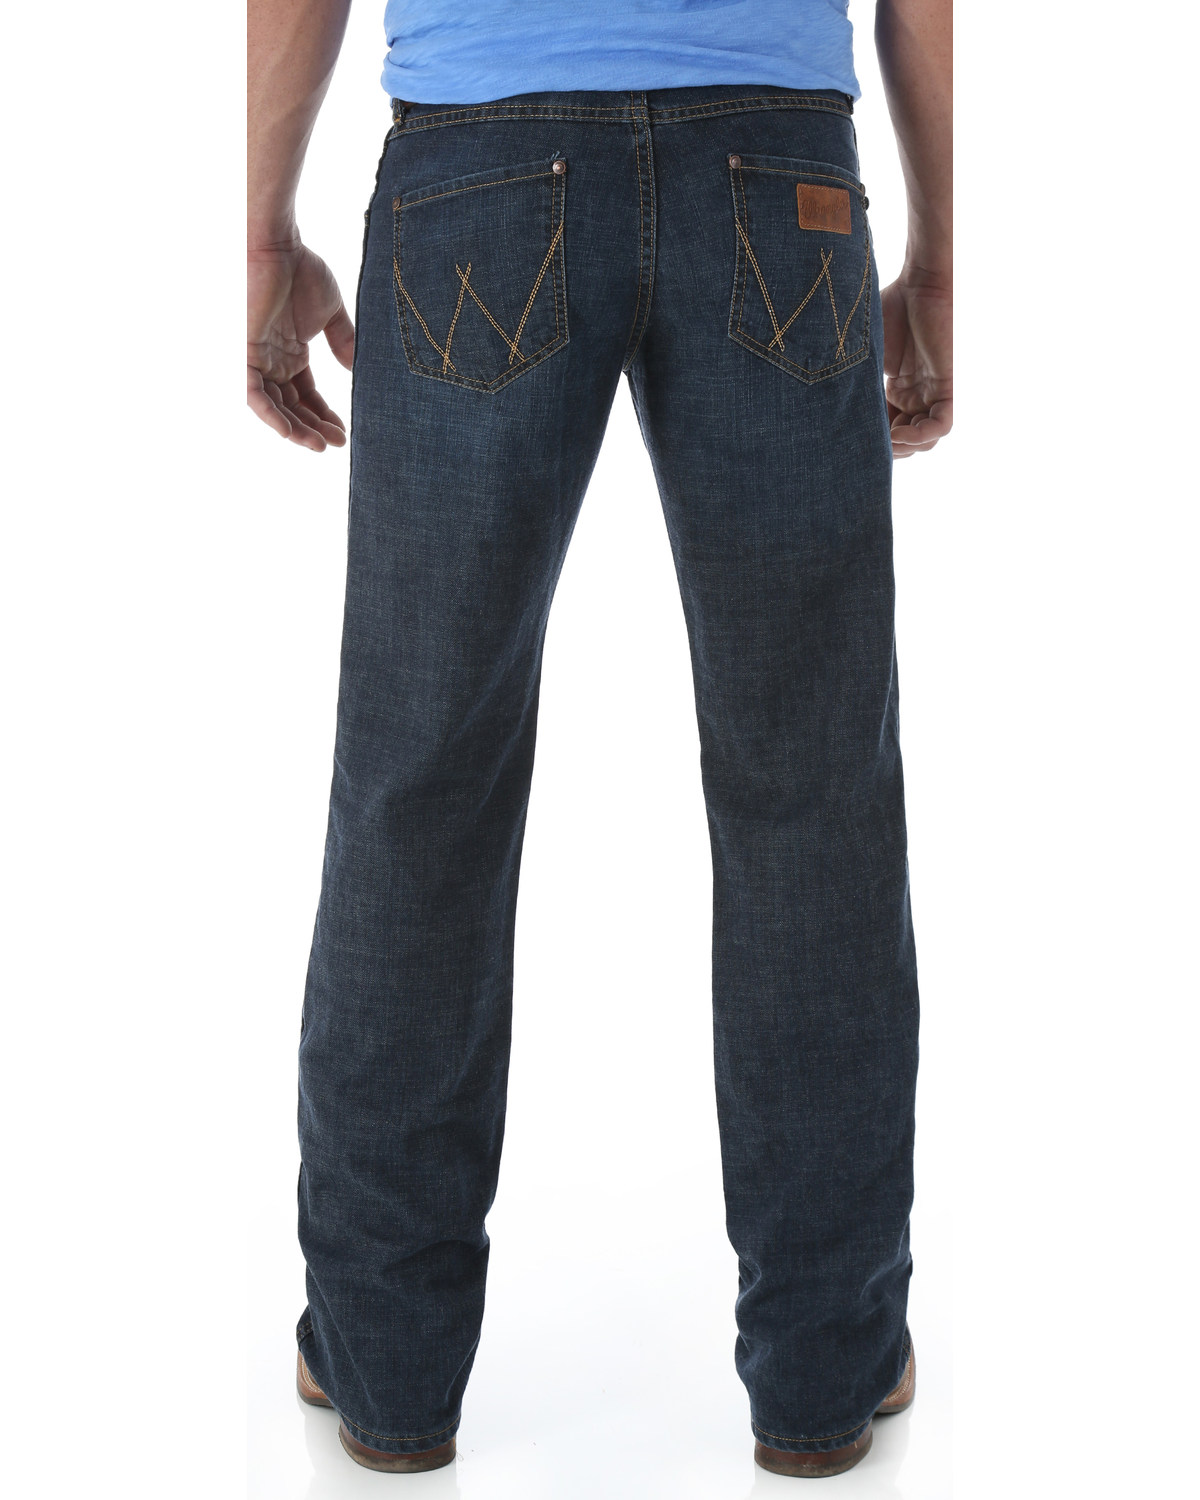 relaxed cut jeans